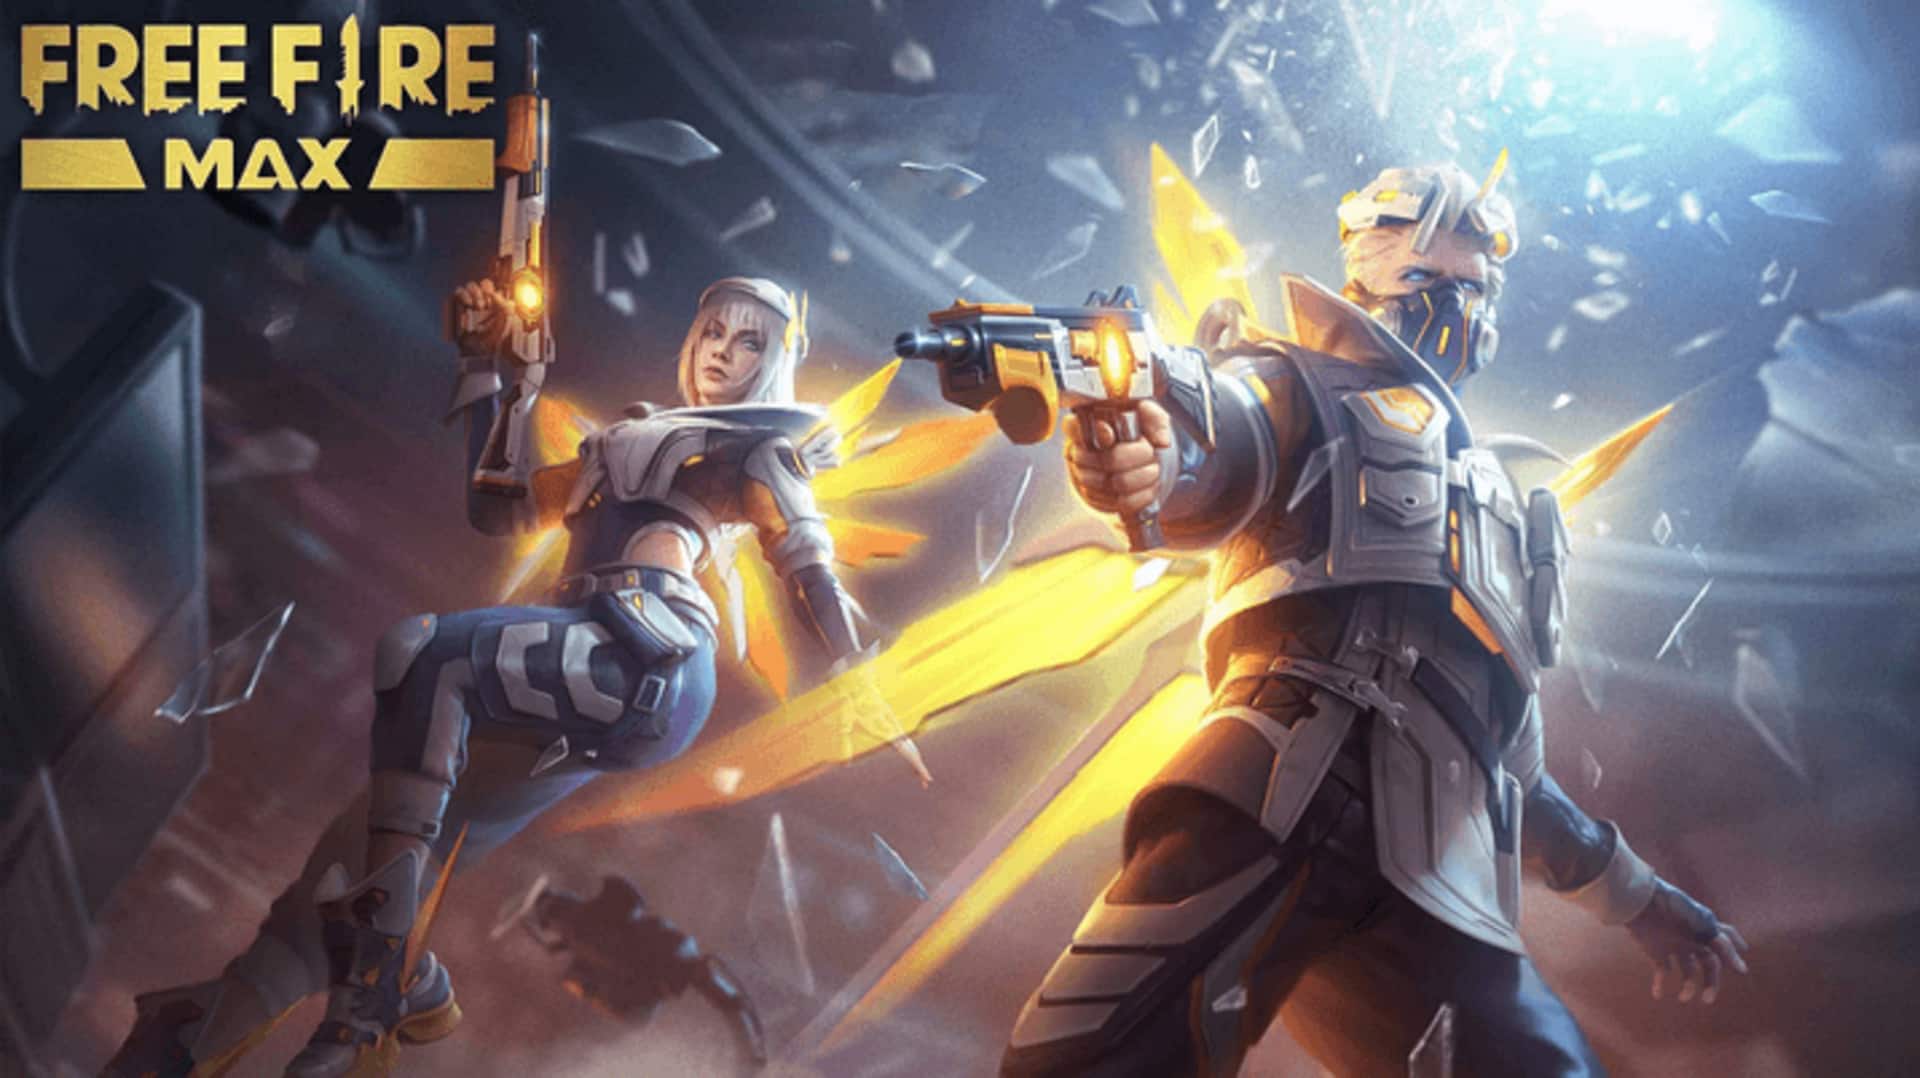 Garena Free Fire MAX: Redeem codes for July 4